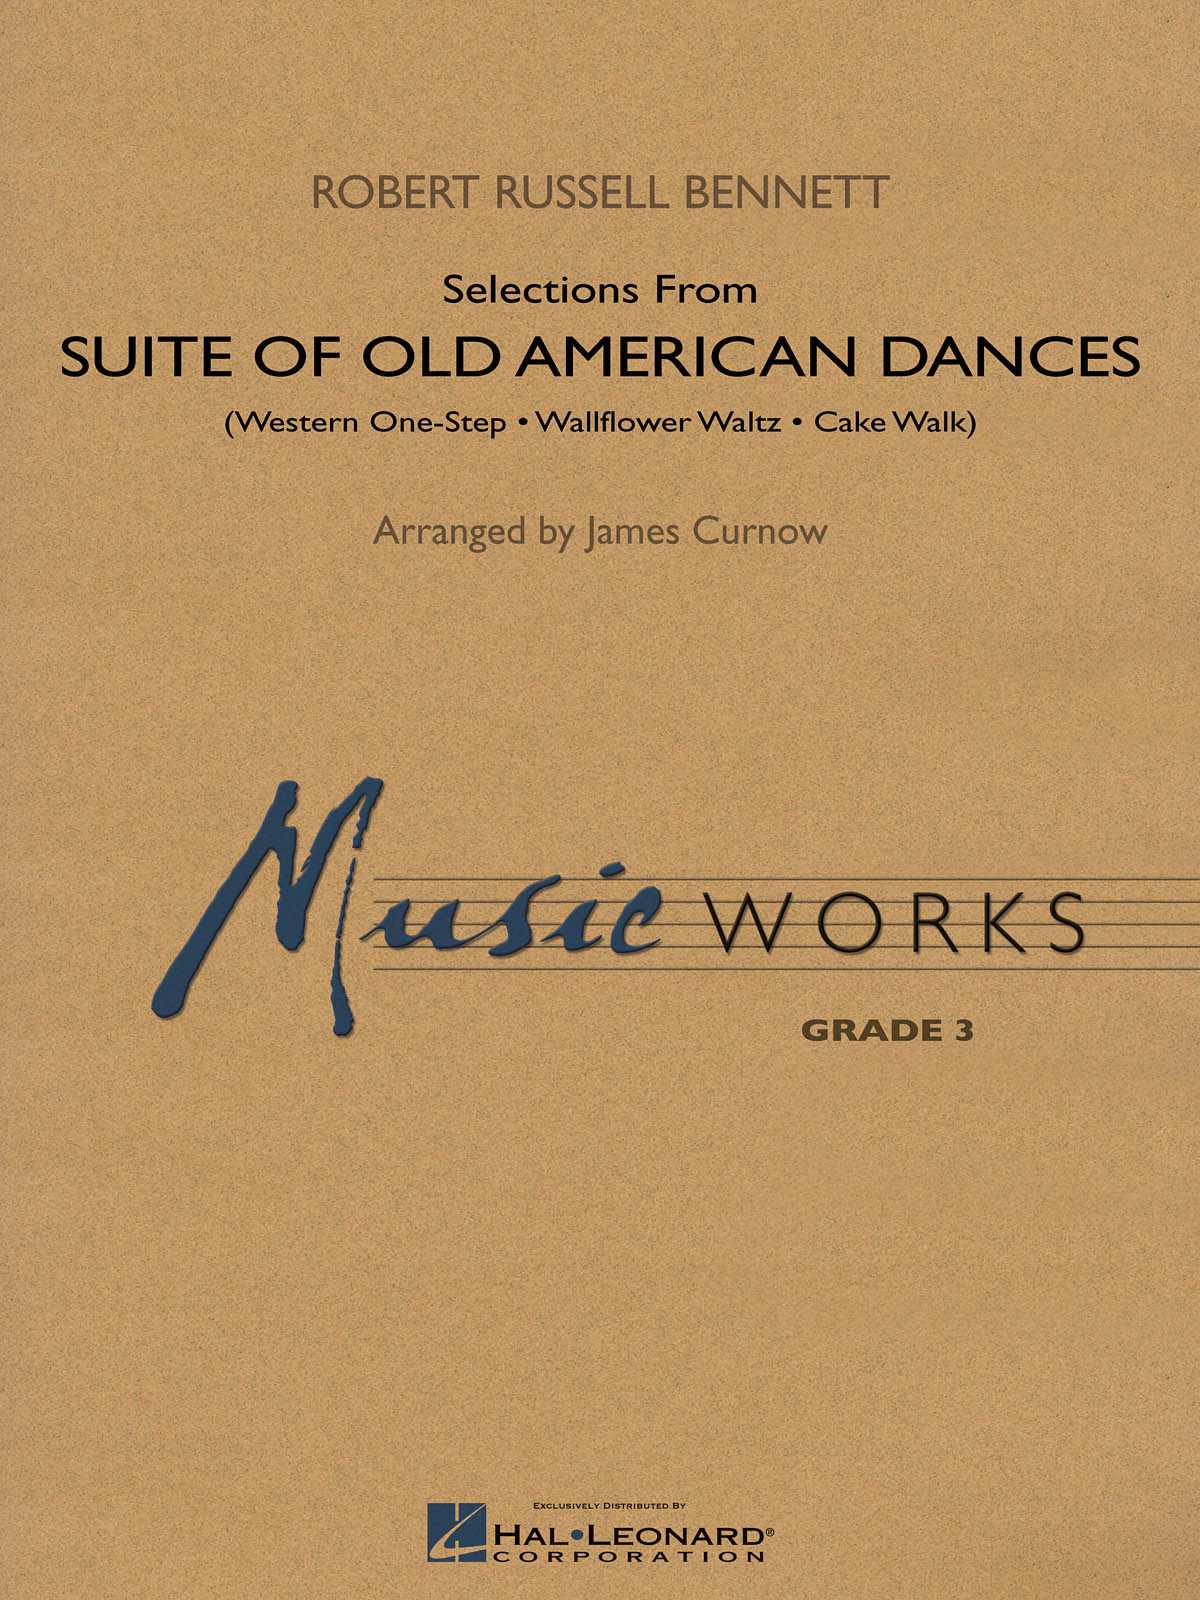 Robert Russell Bennett: Suite of Old American Dances (Selections): Concert Band: